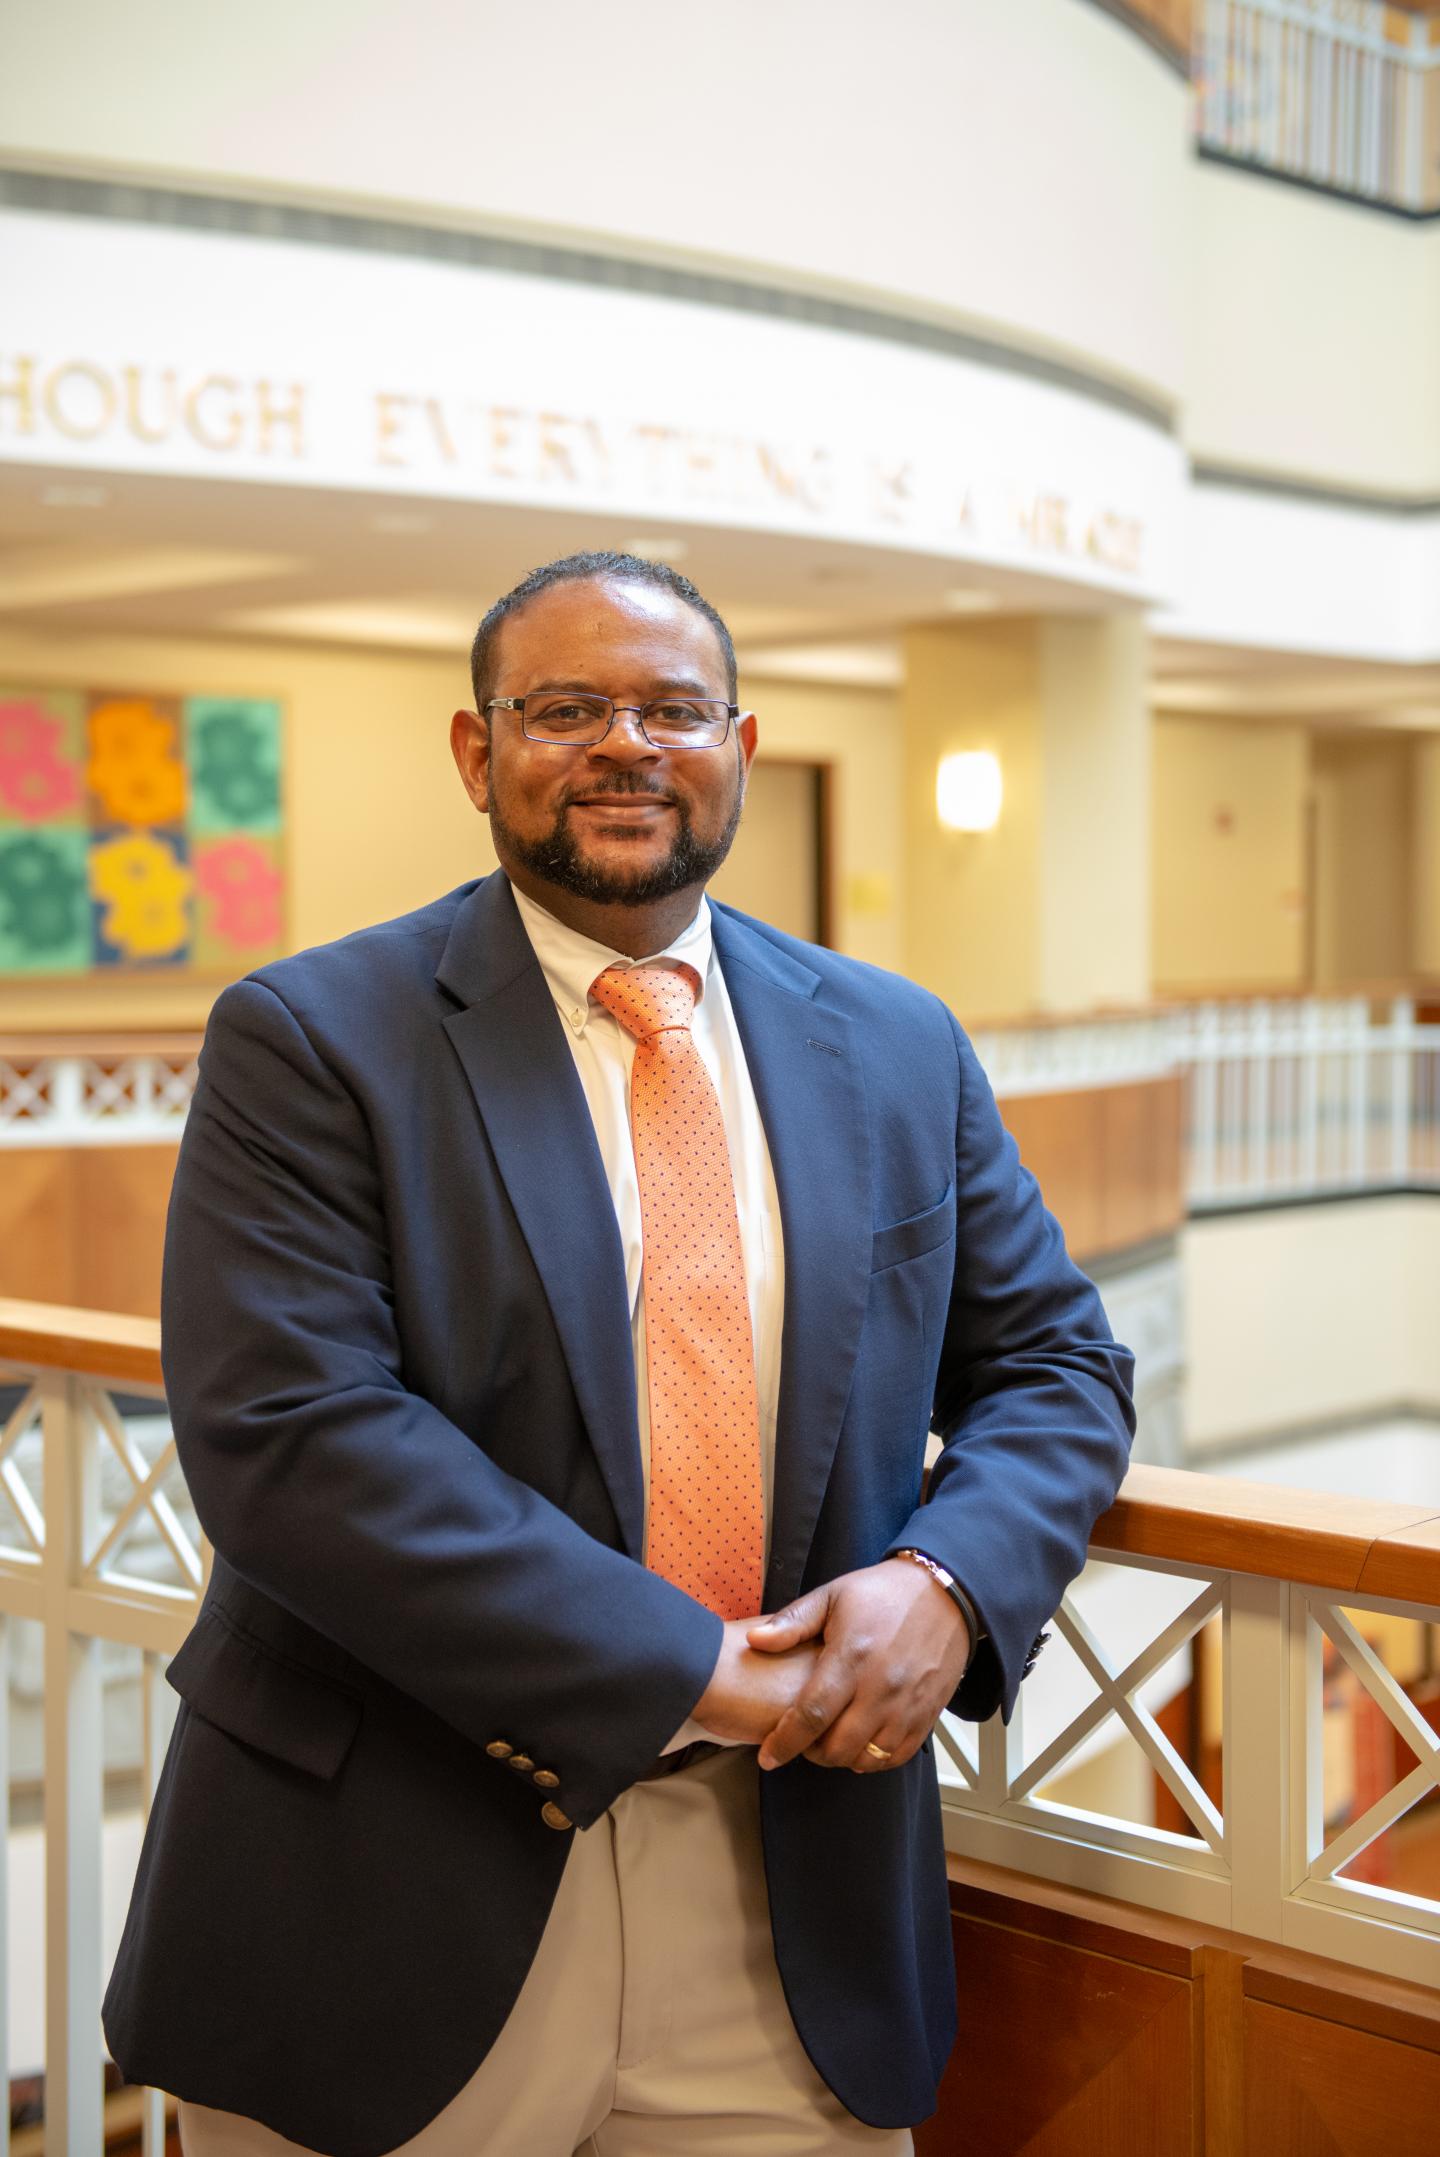 Floyd Wormley is Associate Dean at the College of Science at UTSA